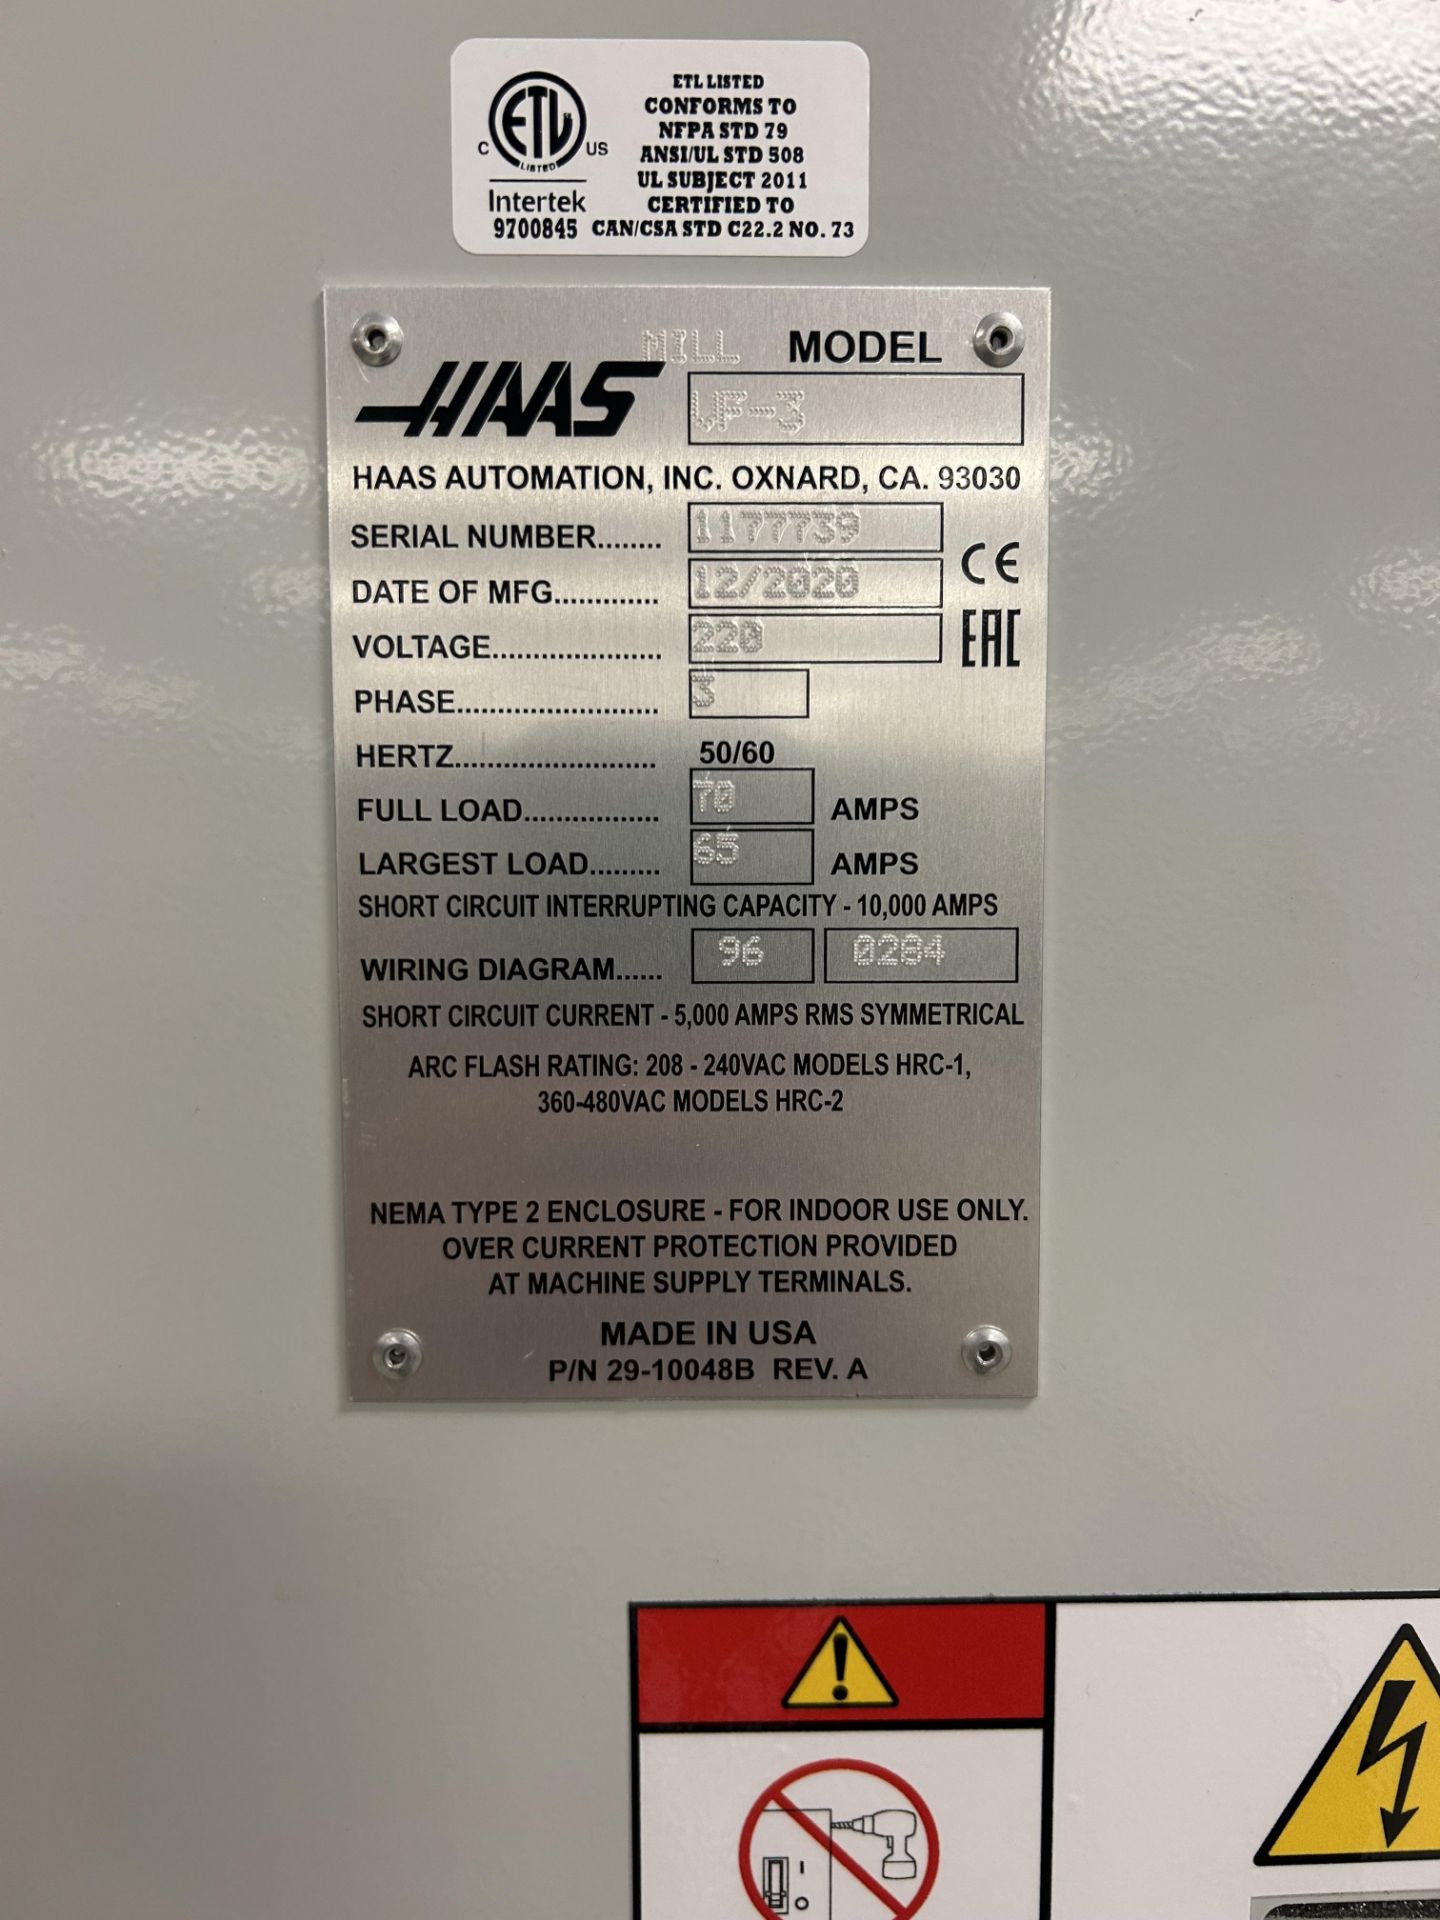 Haas Model VF3 CNC Machining Center - Image 11 of 18